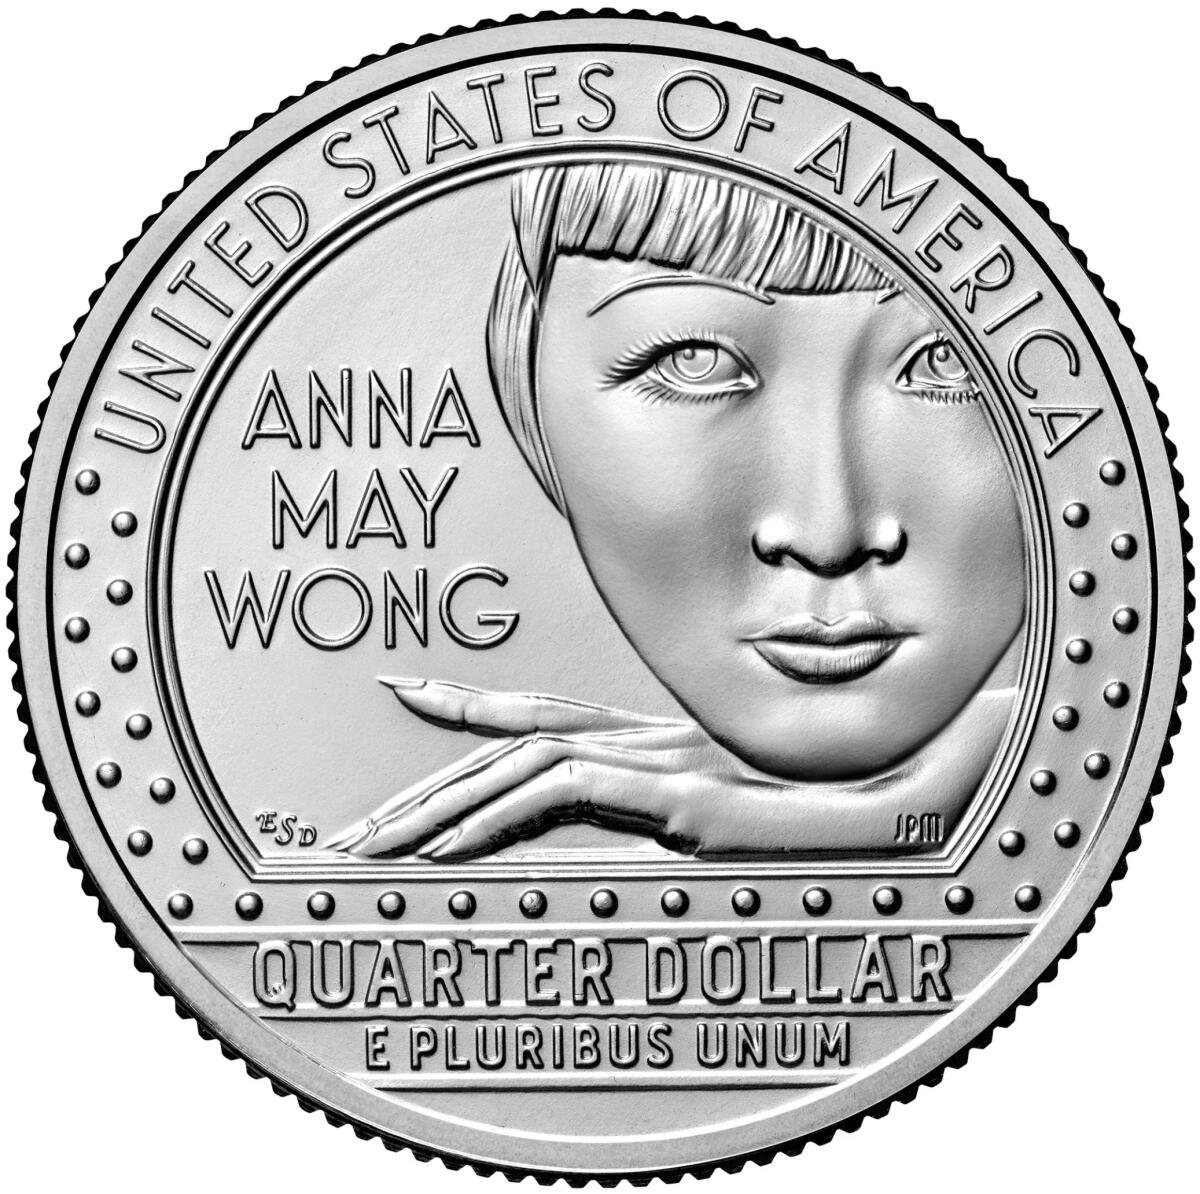 A quarter with Anna May Wong's face, chin and resting hand on it